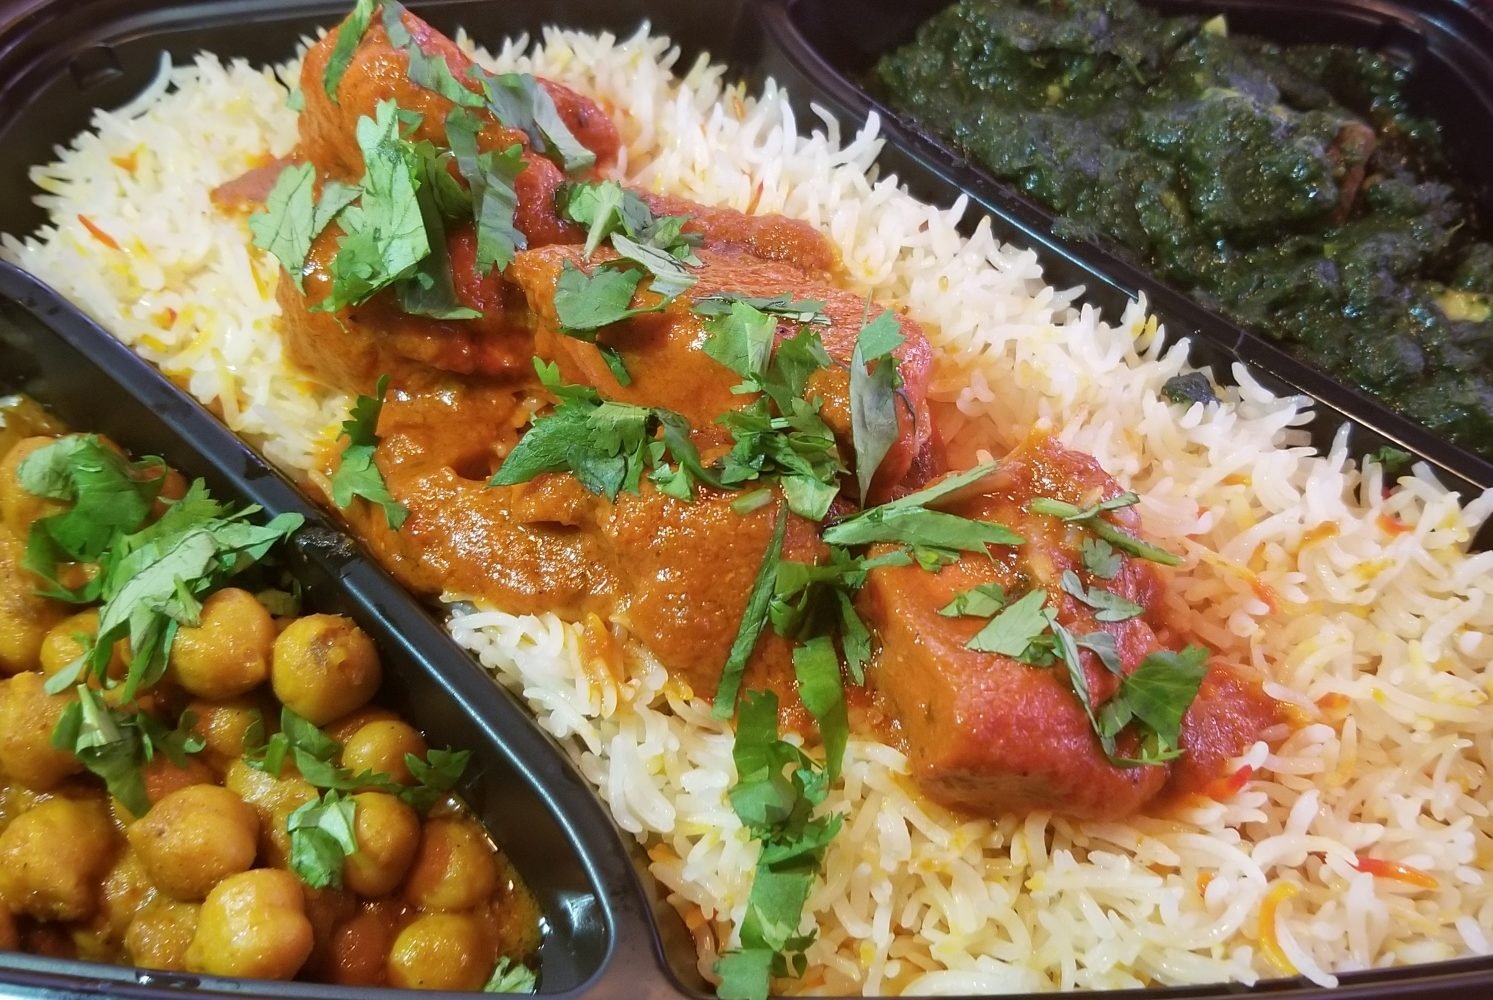 Each $11 platter comes with butter chicken and two side dishes. Photo courtesy of Butter Chicken Company.